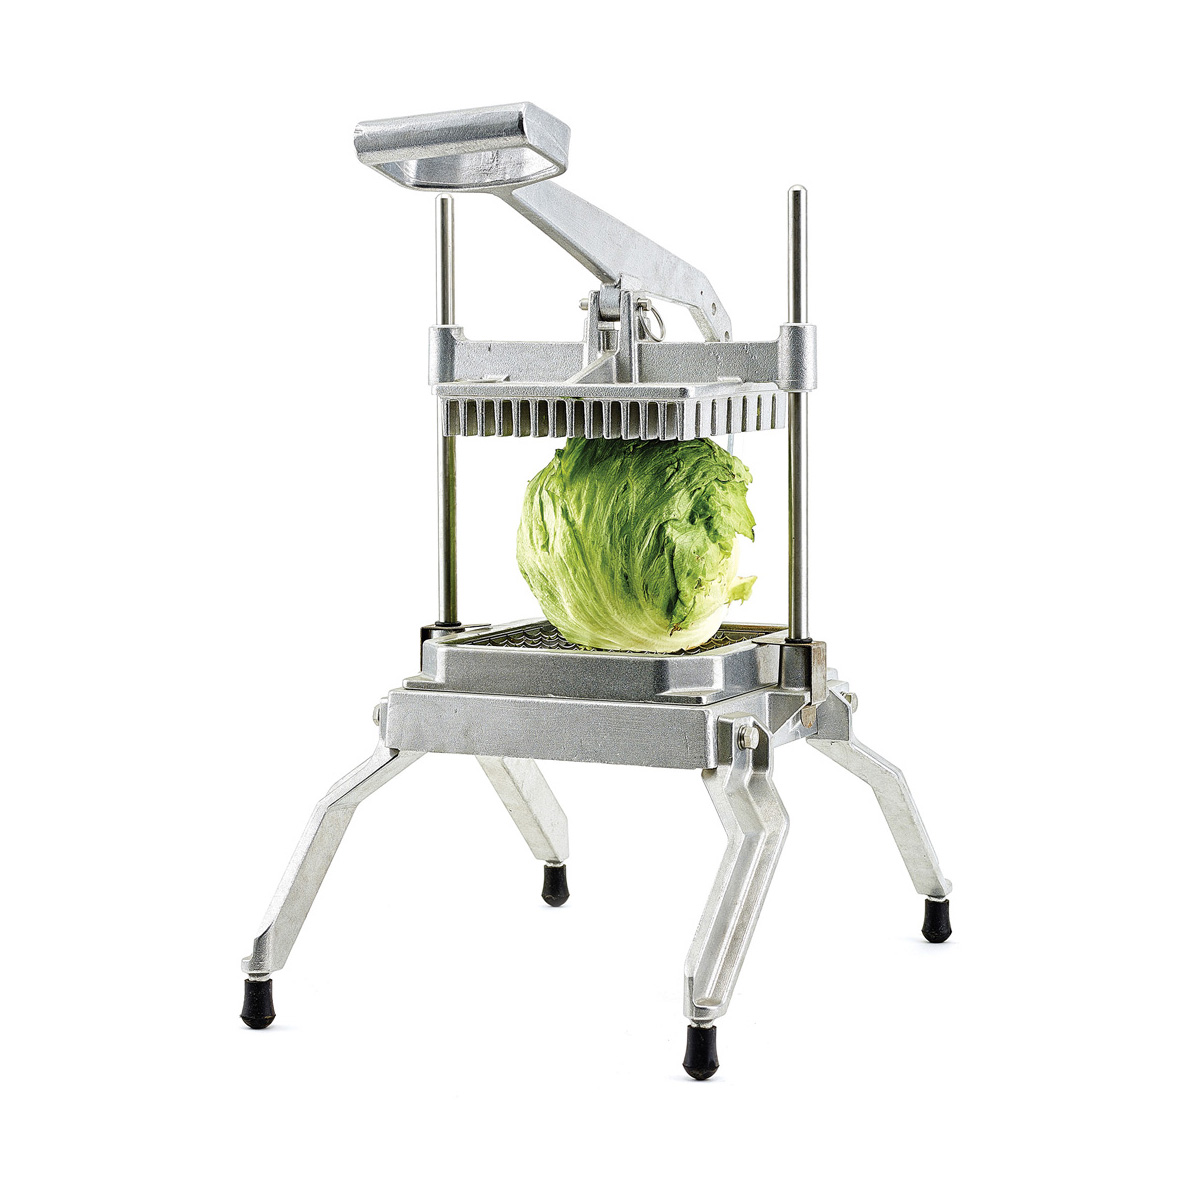 Winco TLC-1 Quick Slice Lettuce Cutter w/ 1″ Square Cuts, Stainless Steel Blades, Aluminum Frame